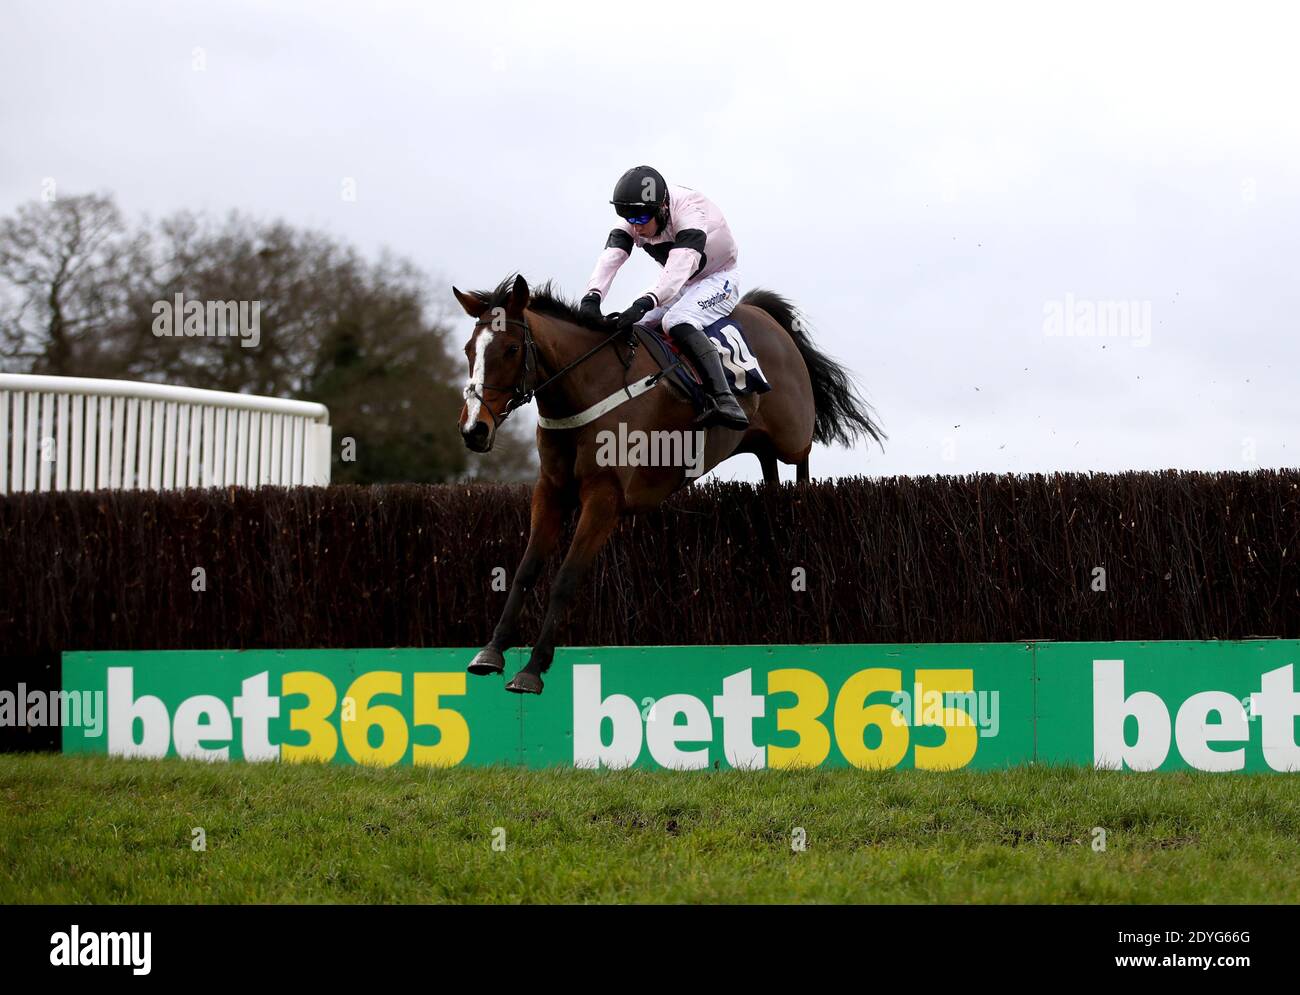 Trimmers Lane ridden by Conor O'Farrell on their way to win the William Hill Acca Freedom Novices' Handicap Chase during Boxing Day of the William Hill Yorkshire Christmas Meeting at Wetherby Racecourse. Stock Photo